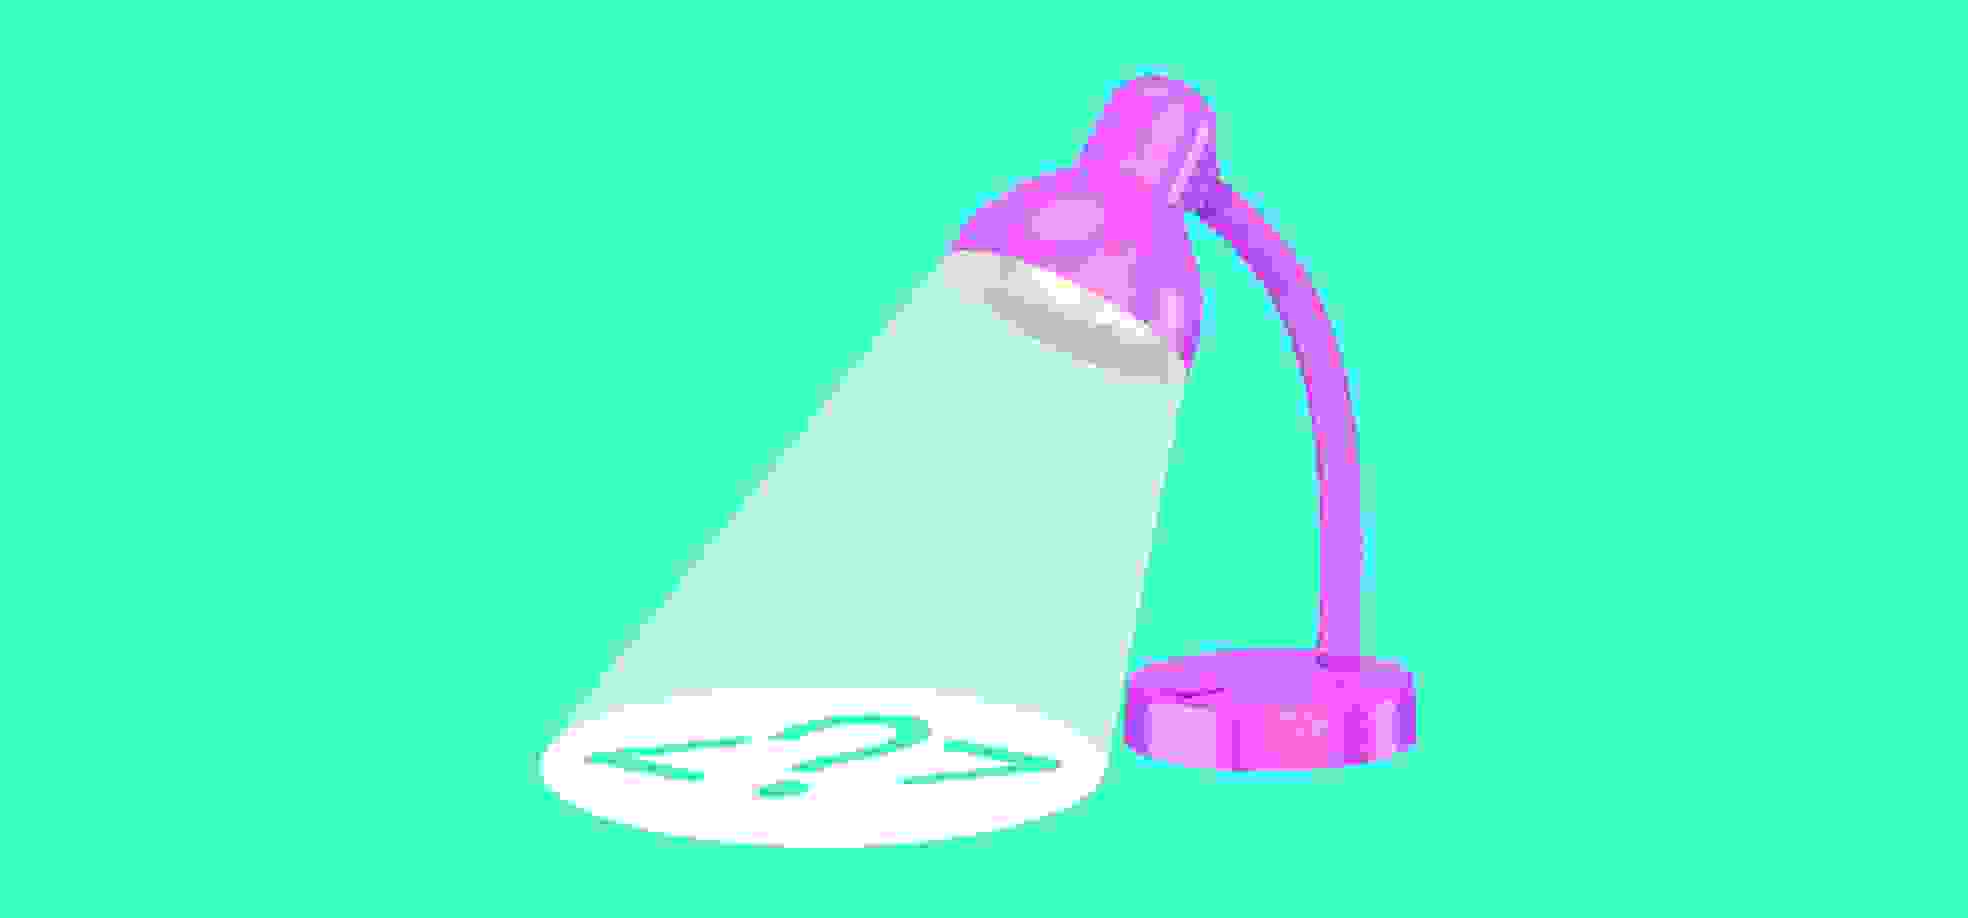 illustration of a purple lamp on a green background